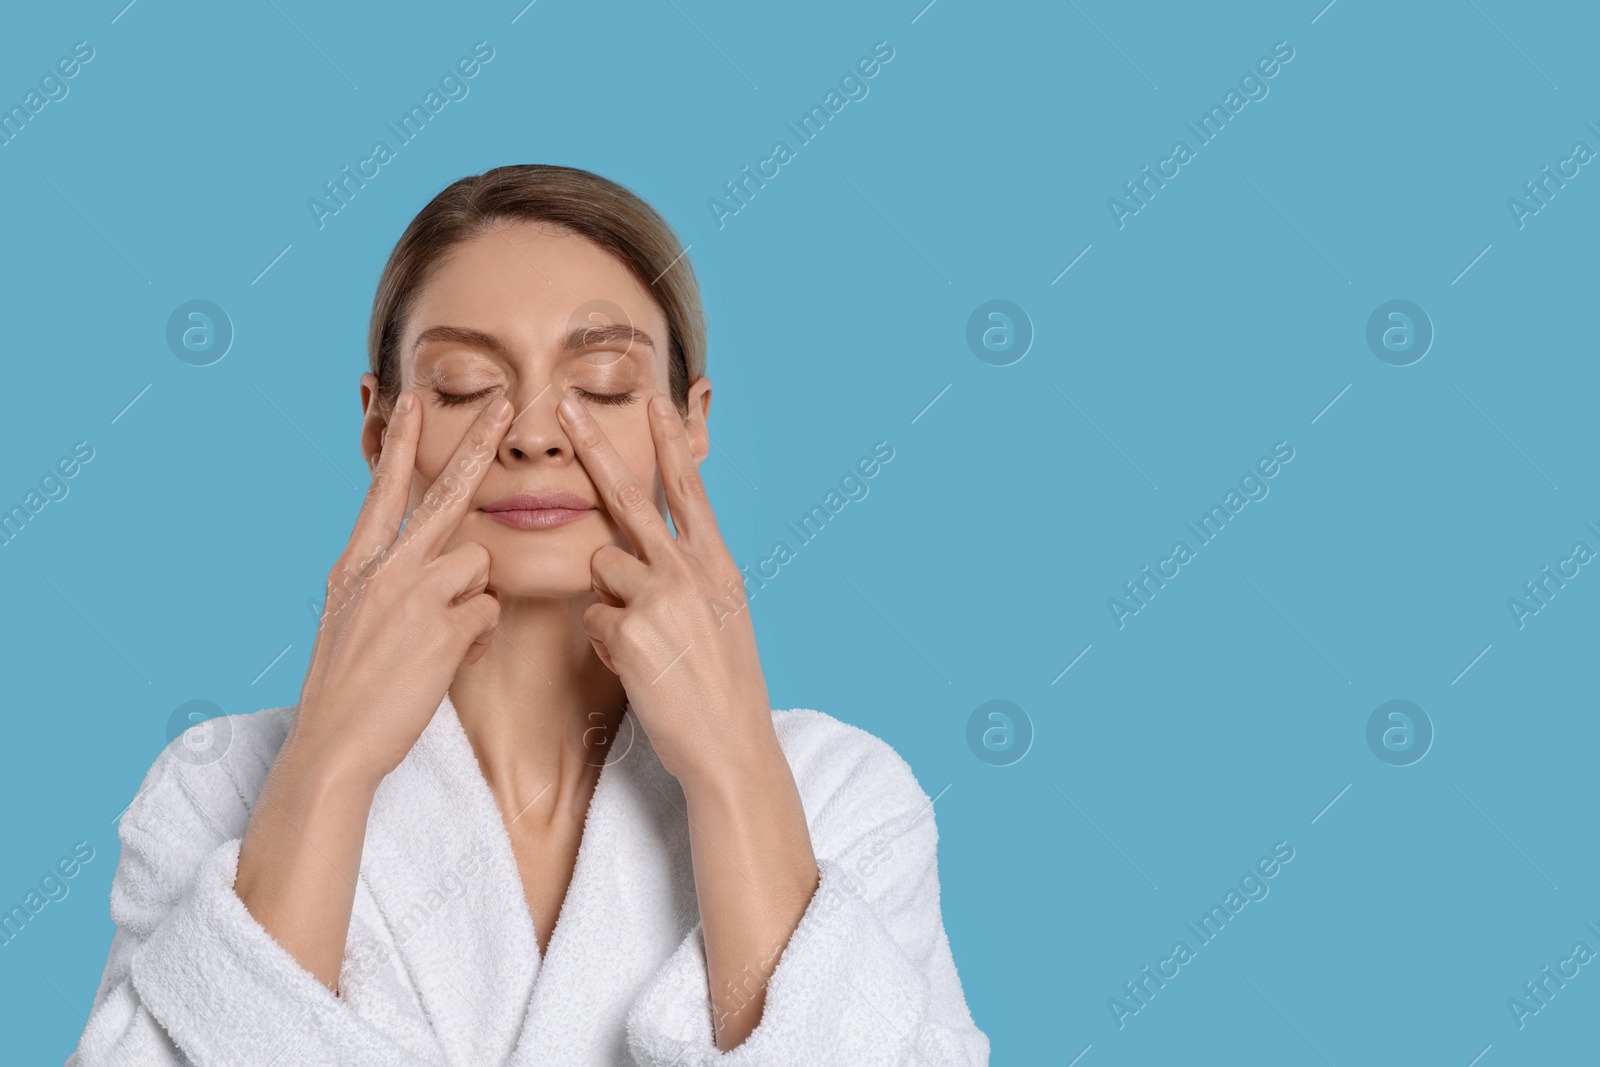 Photo of Woman massaging her face on turquoise background. Space for text